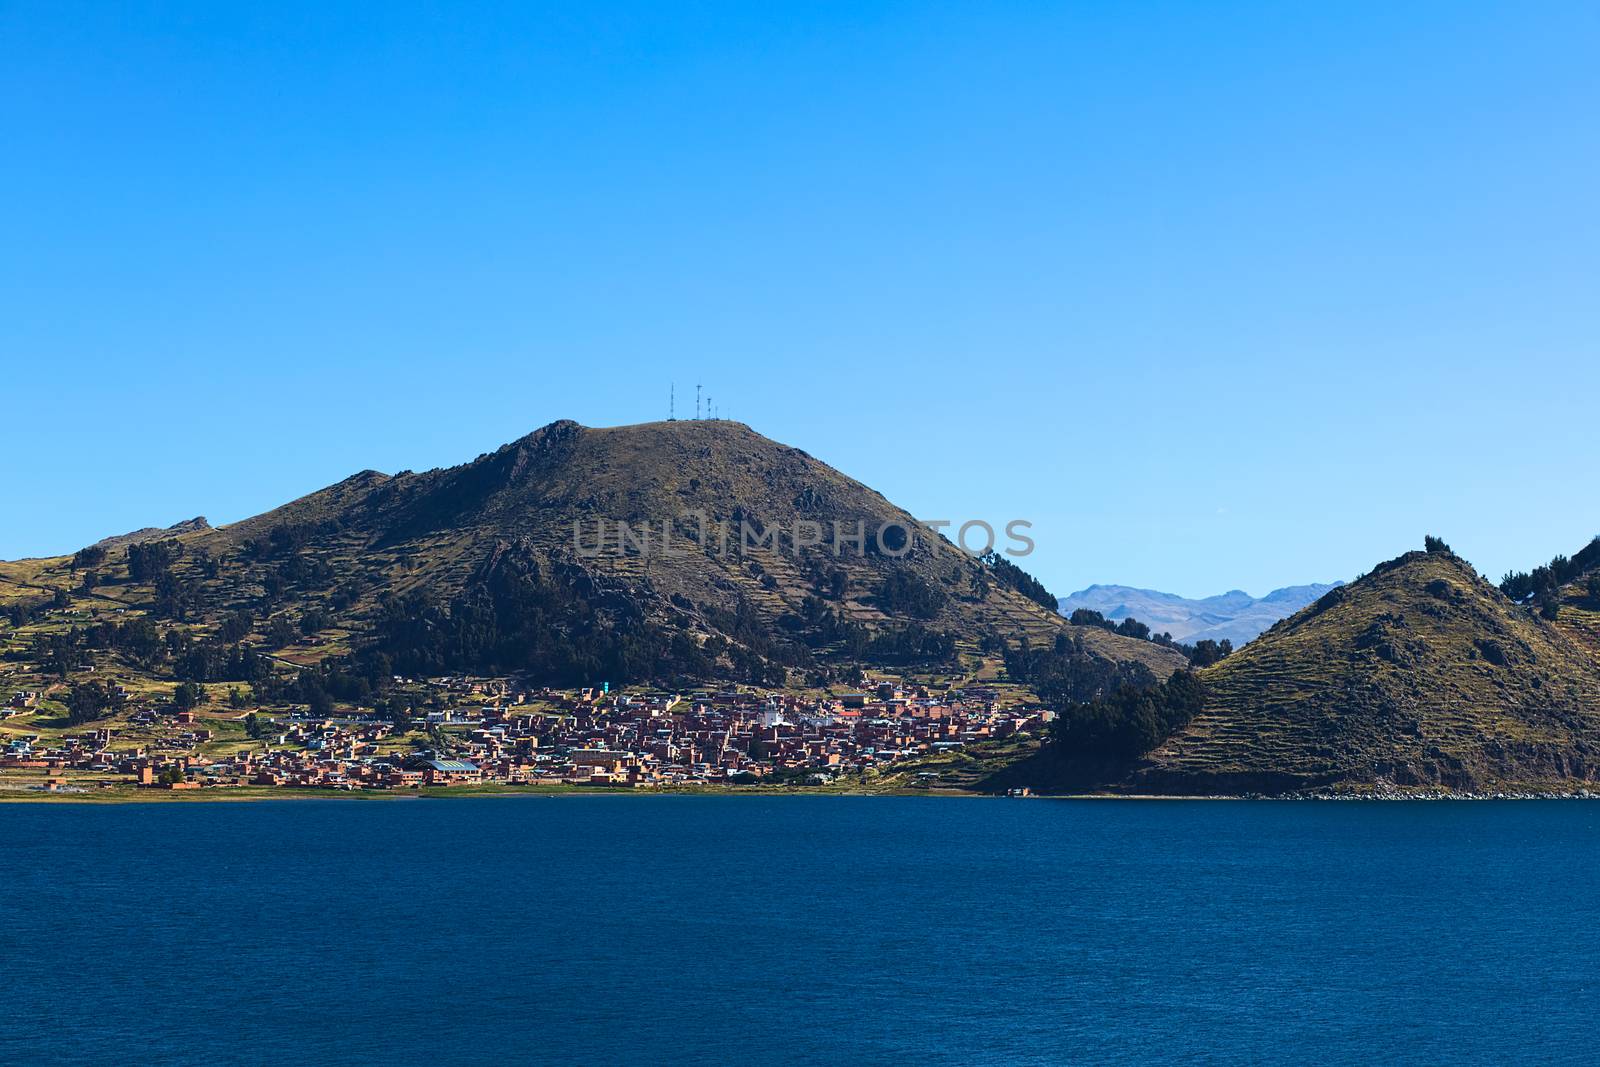 The small tourist town of Copacabana on the shore of Lake Titicaca in Bolivia